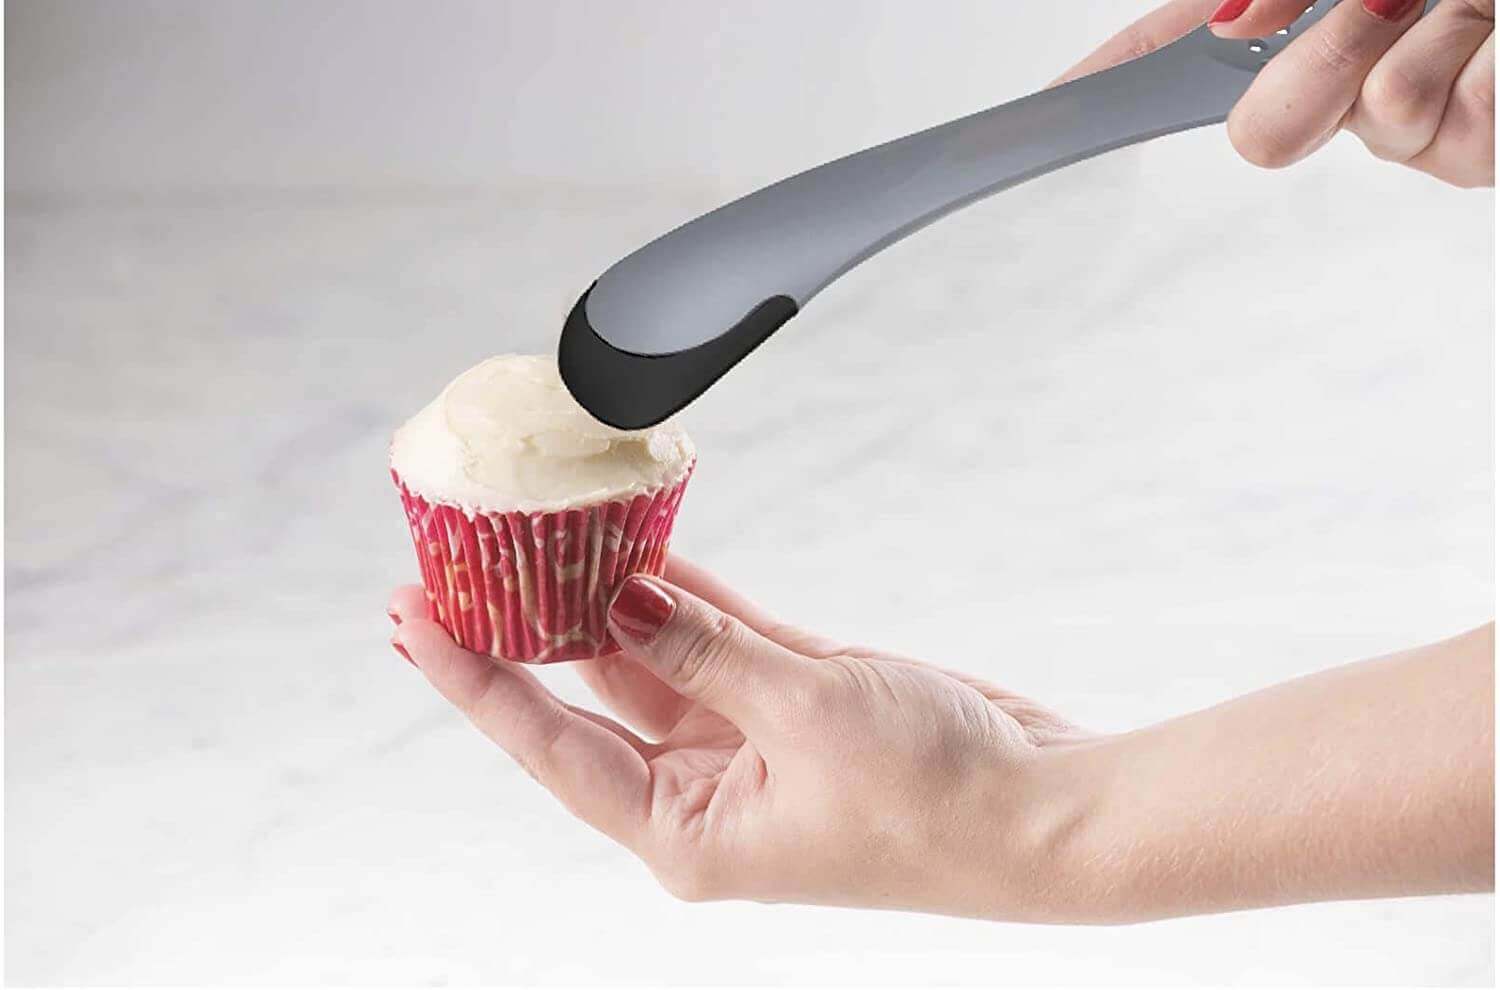 PRYMALL 5-in-1 is a must have kitchen tool